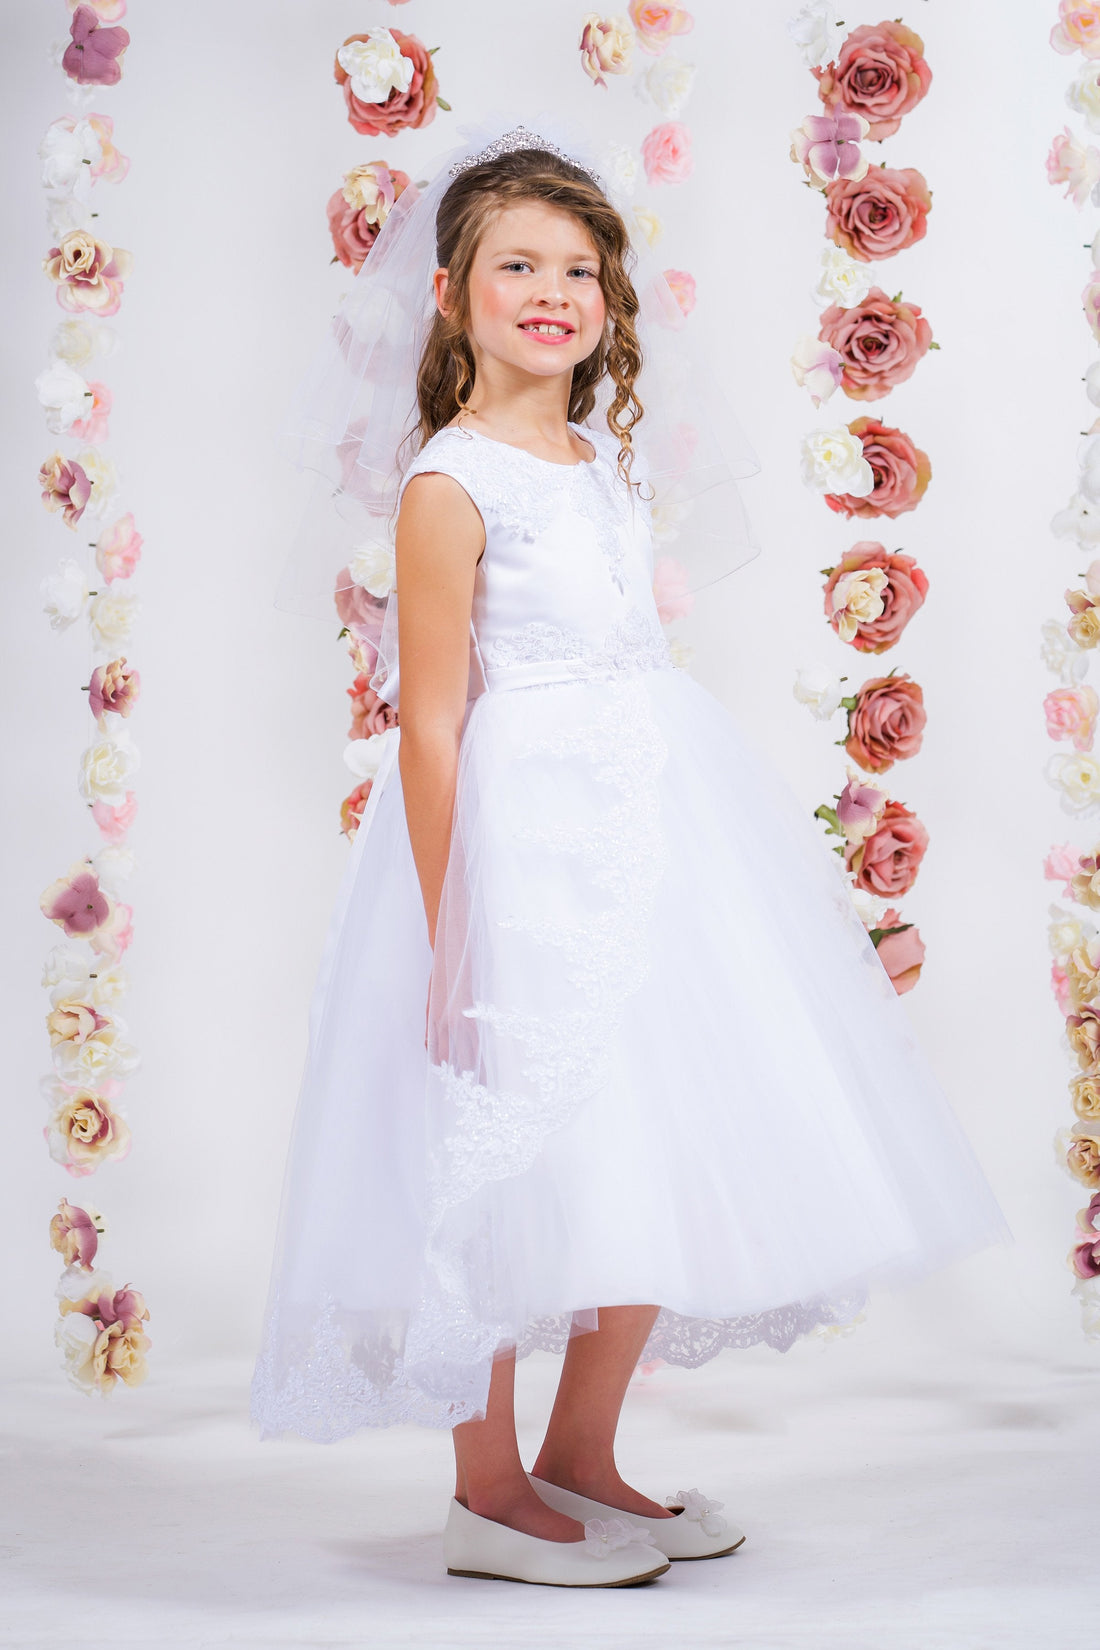 Girl Party Lace Appliqué Swoop Train Dress by AS7008 Kids Dream - Girl Formal Dresses